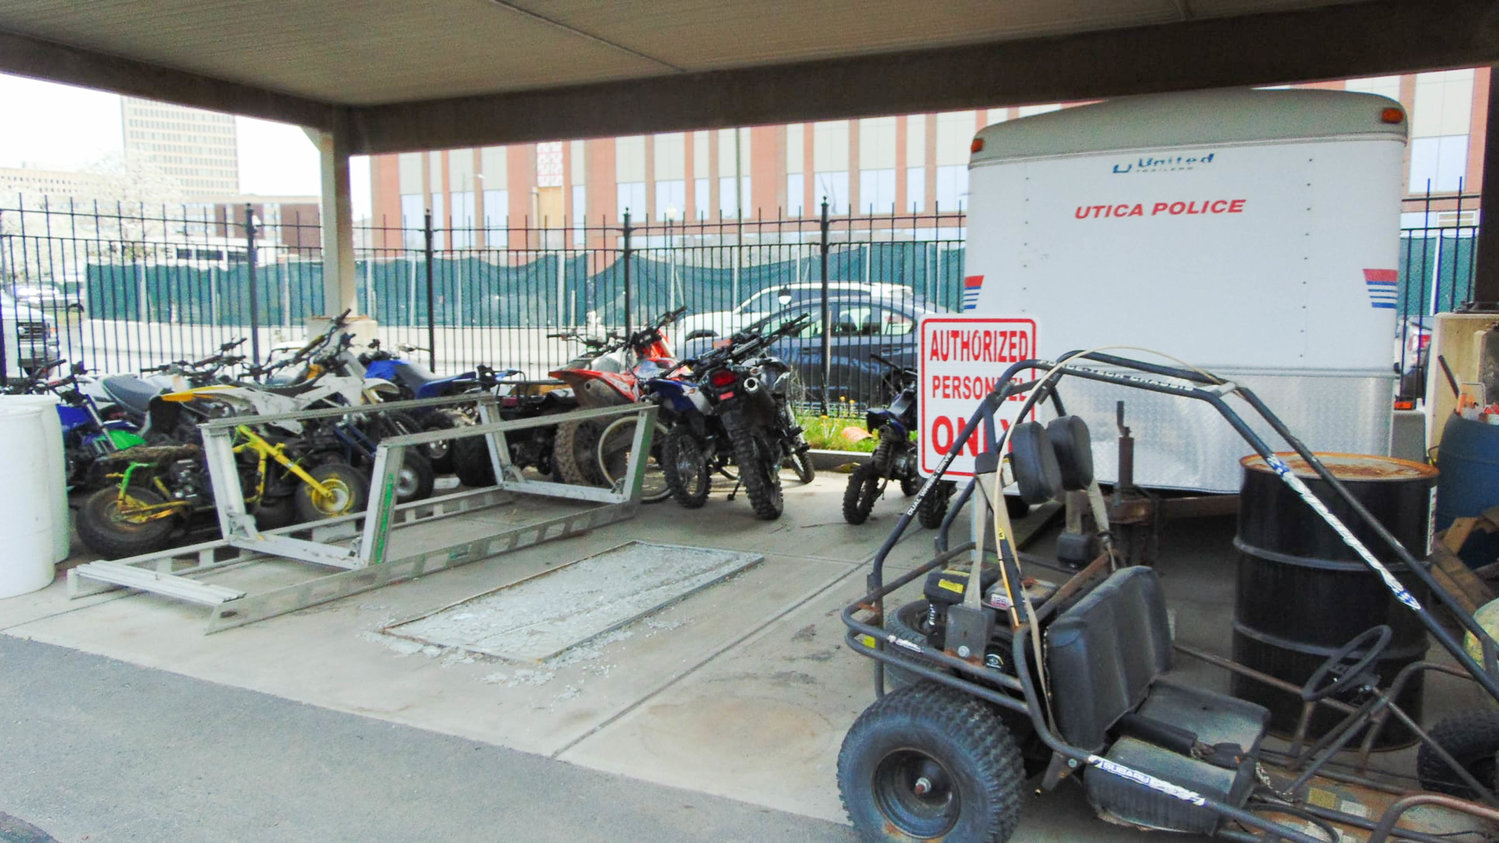 A total of five dirt bikes were seized and impounded by the Utica Police Department during a crackdown on motorized vehicles in north and east Utica on Thursday.